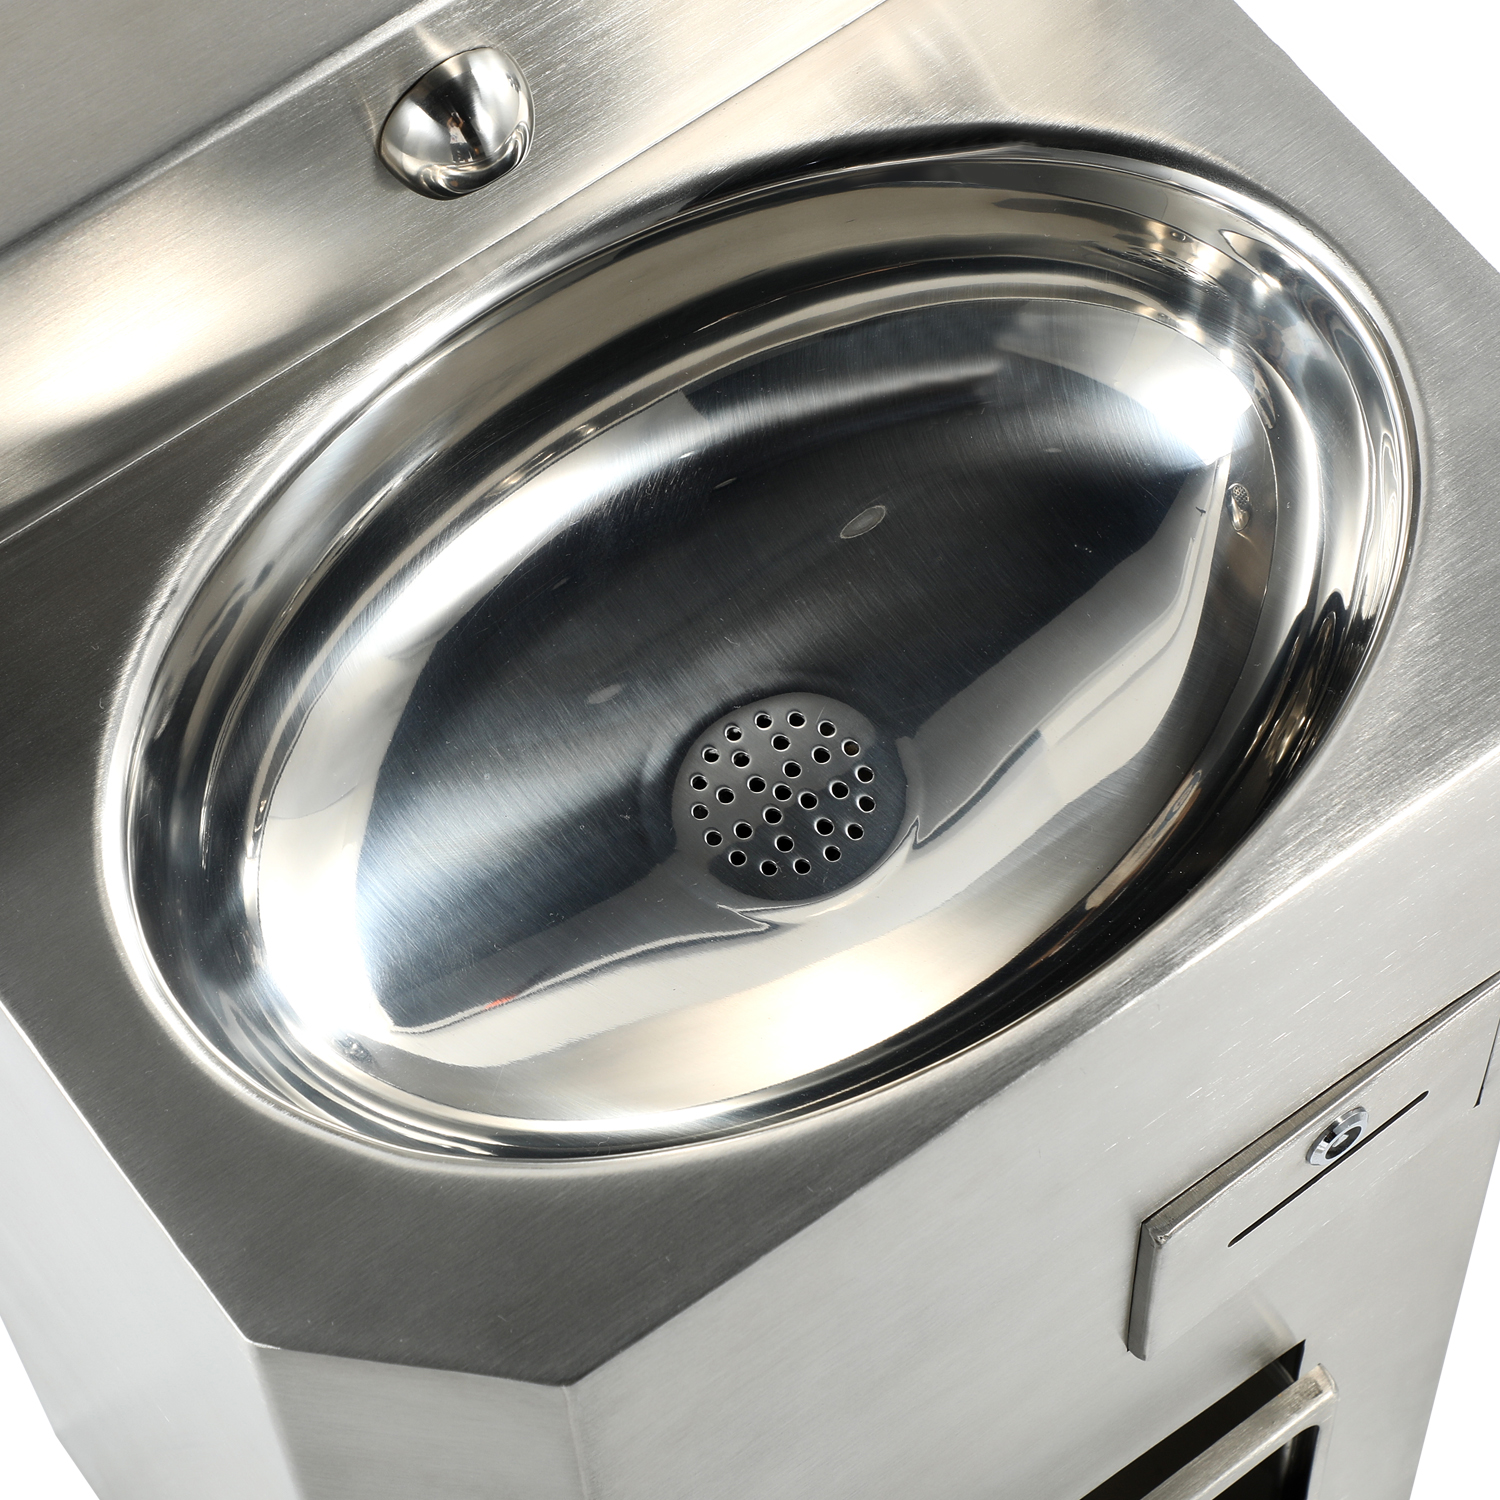 stainless steel wash basin with trashcan&wash button